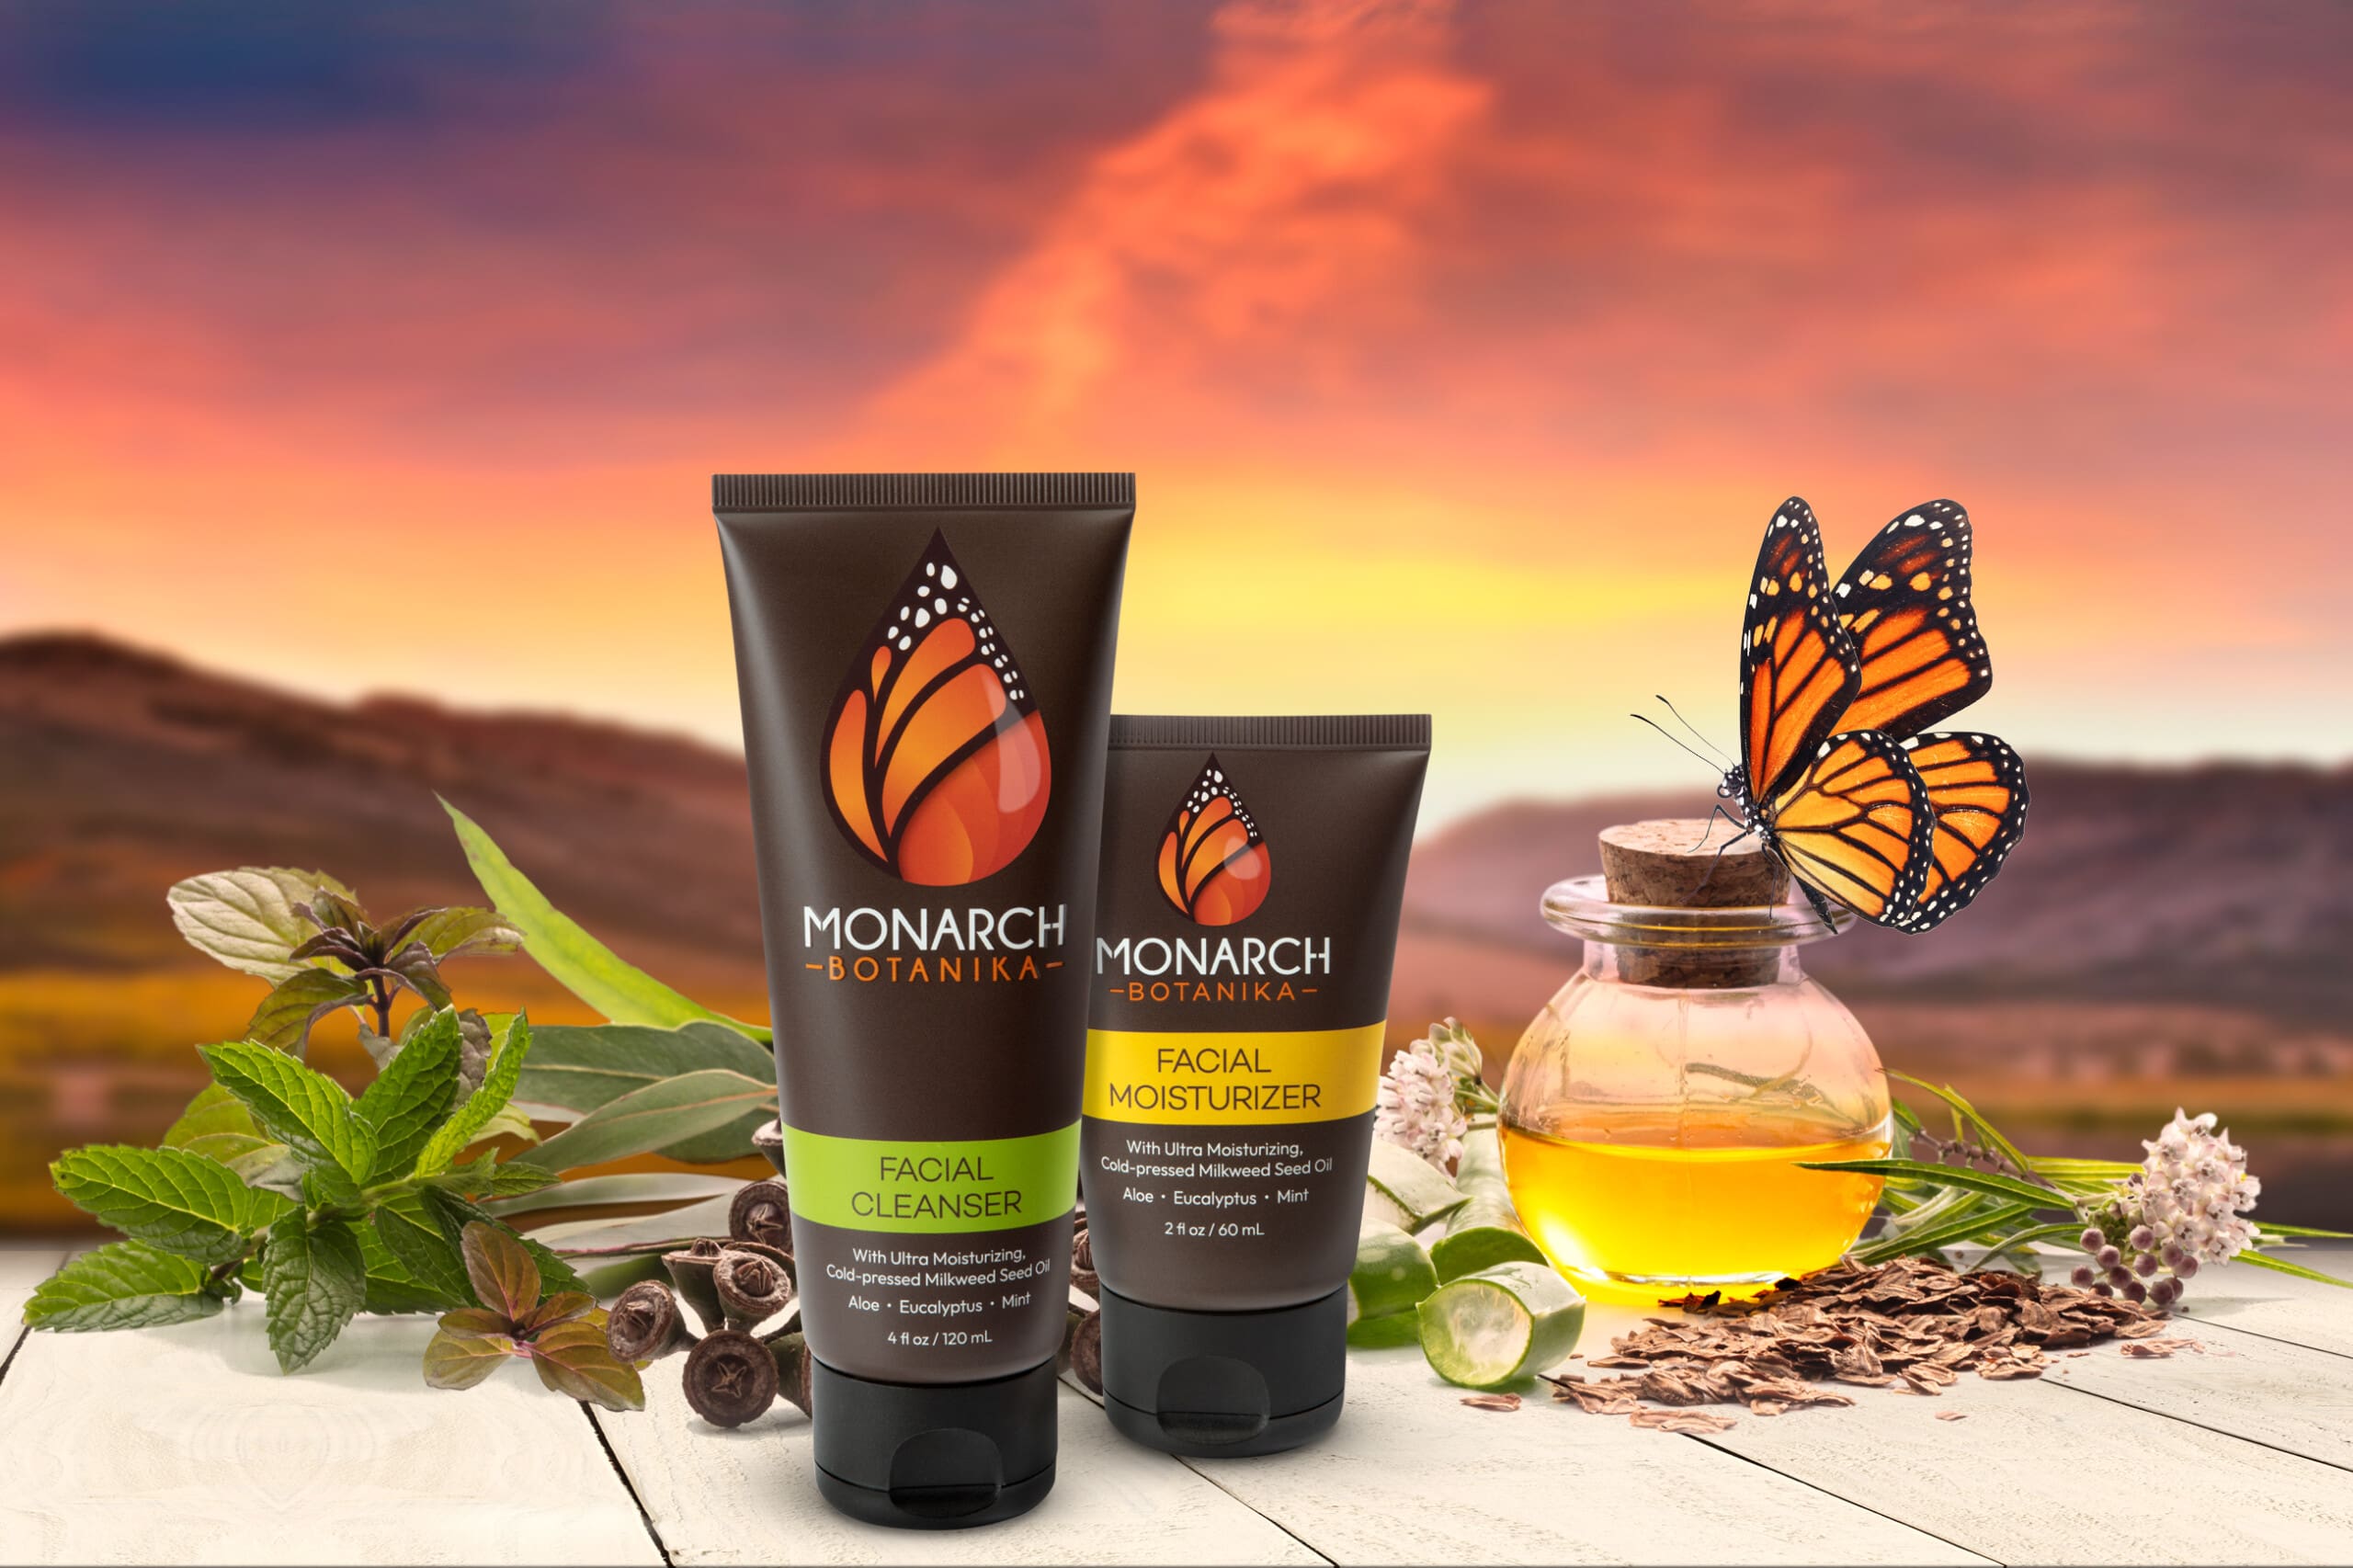 Introducing Monarch Botanika: Where Beauty Meets Conservation